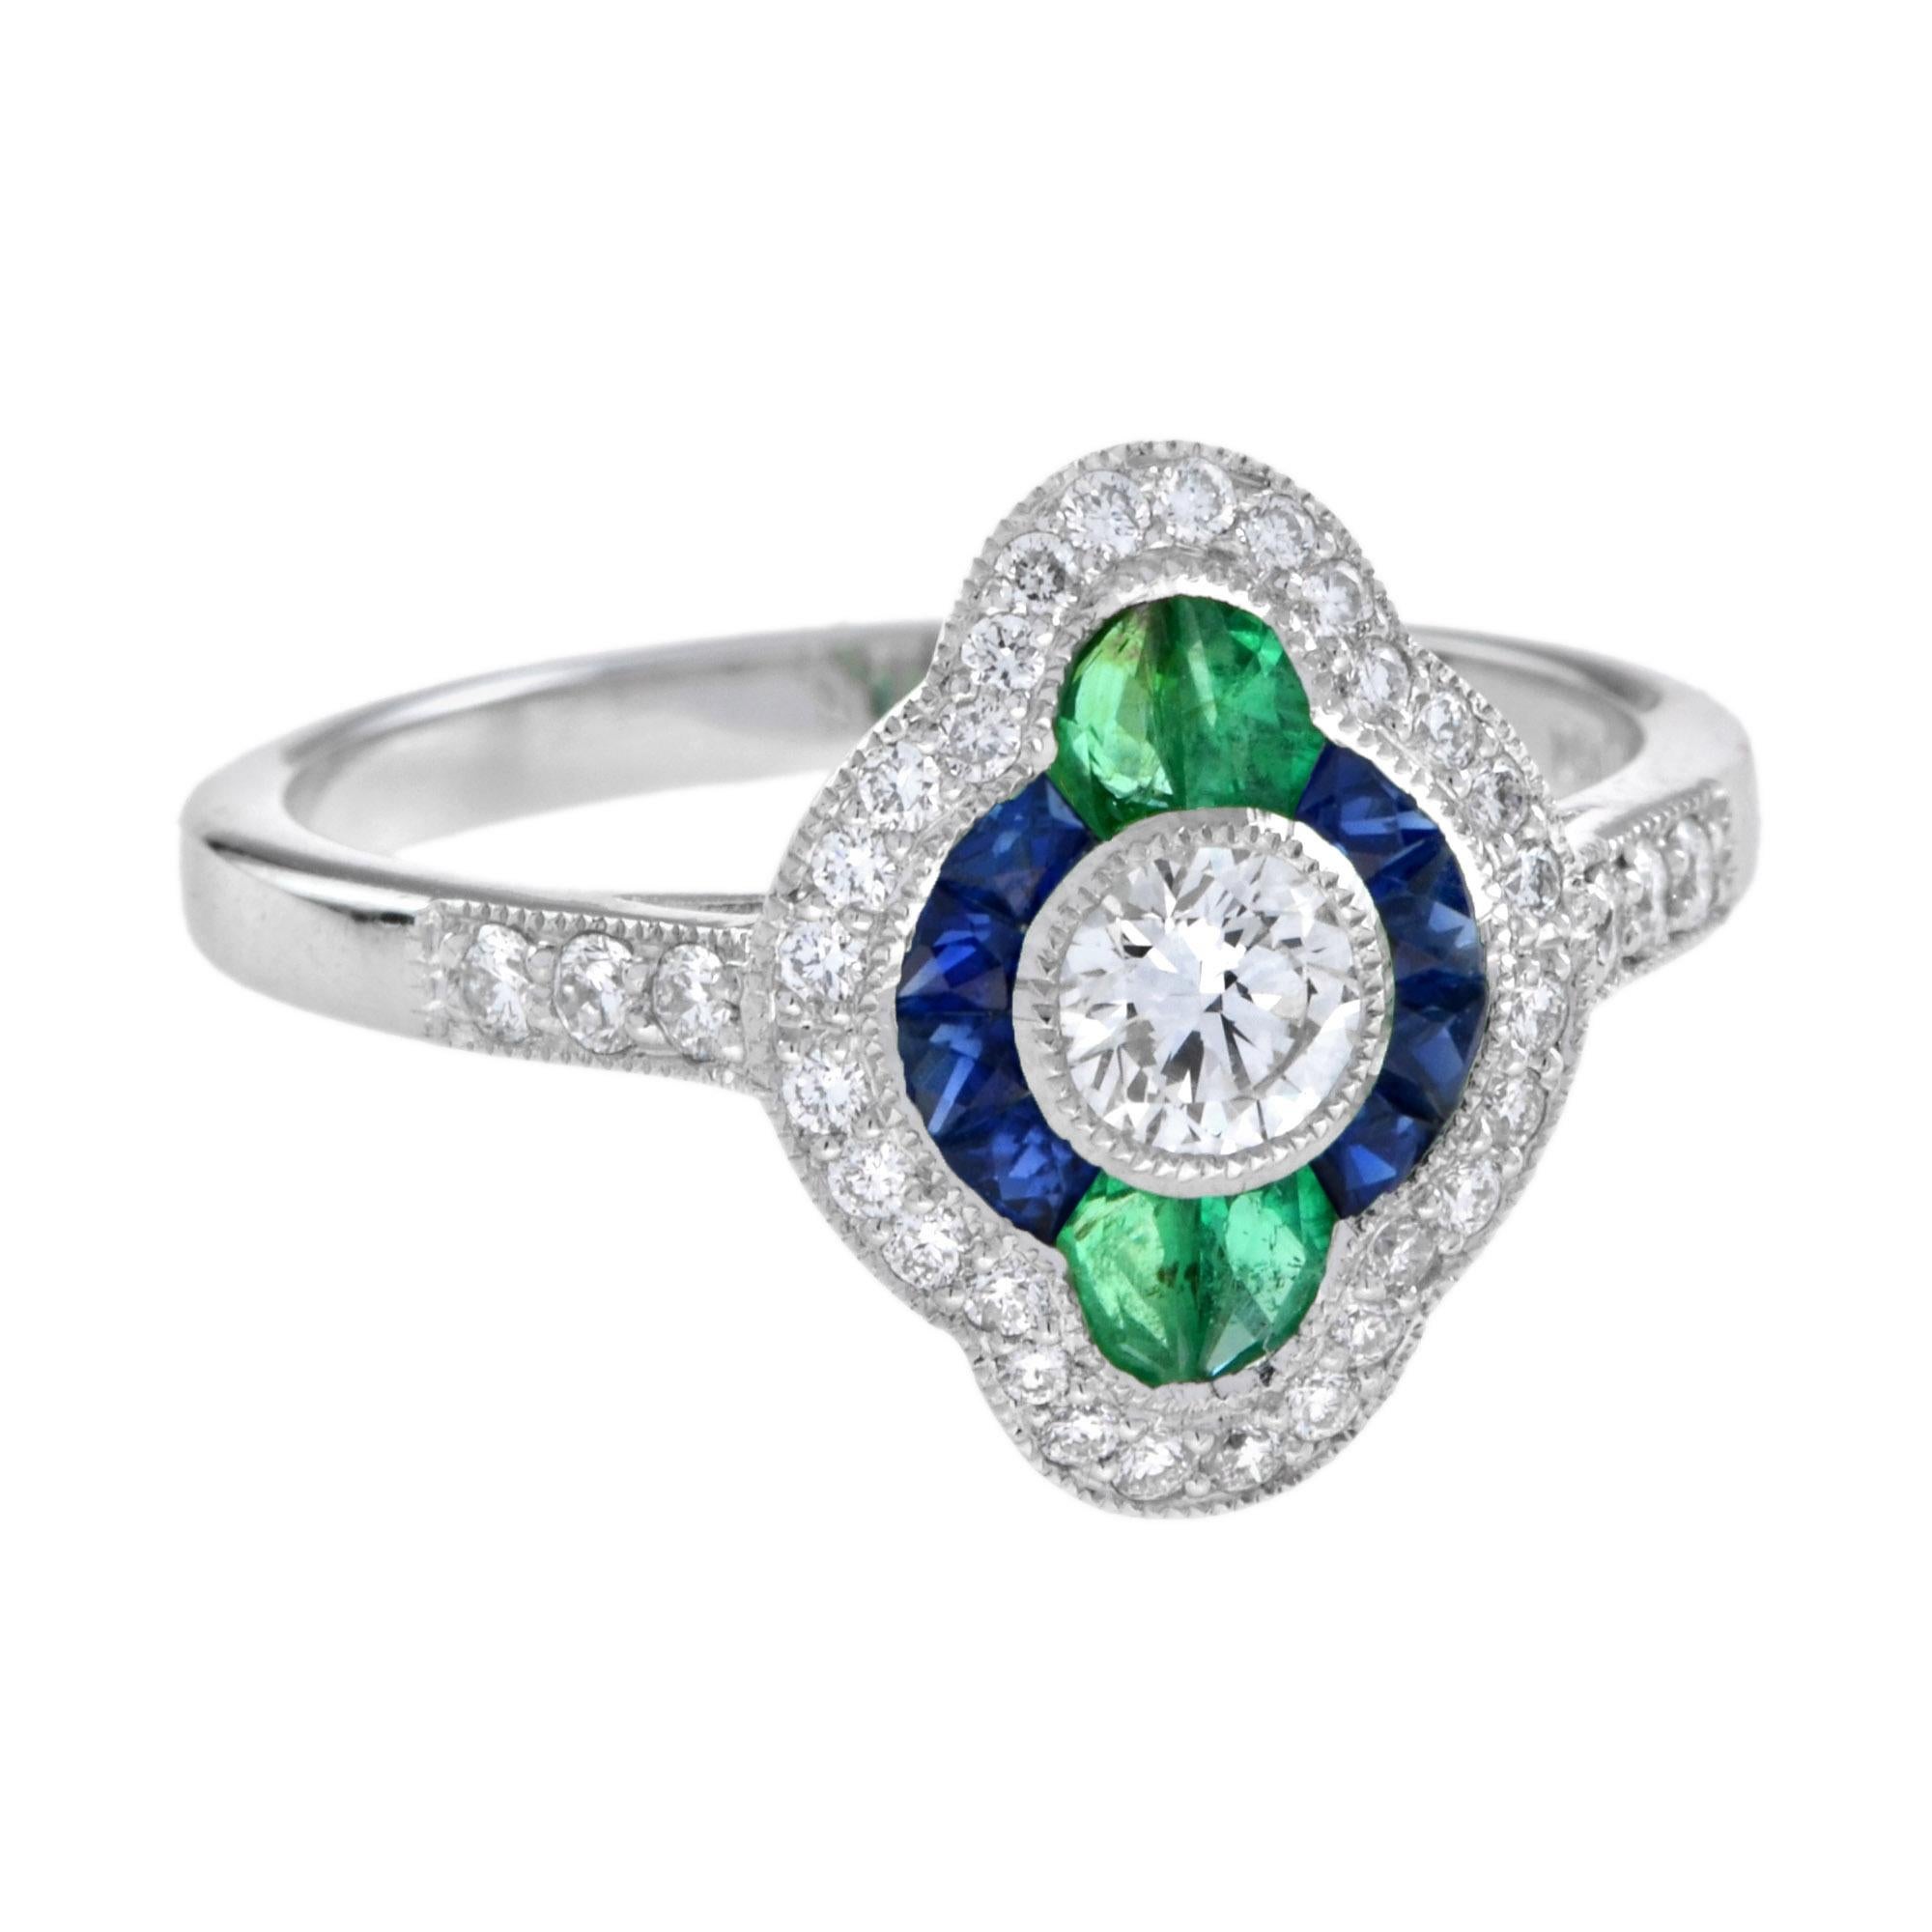 For Sale:  Diamond Sapphire Emerald Art Deco Style Engagement Ring in 18k White Gold 3